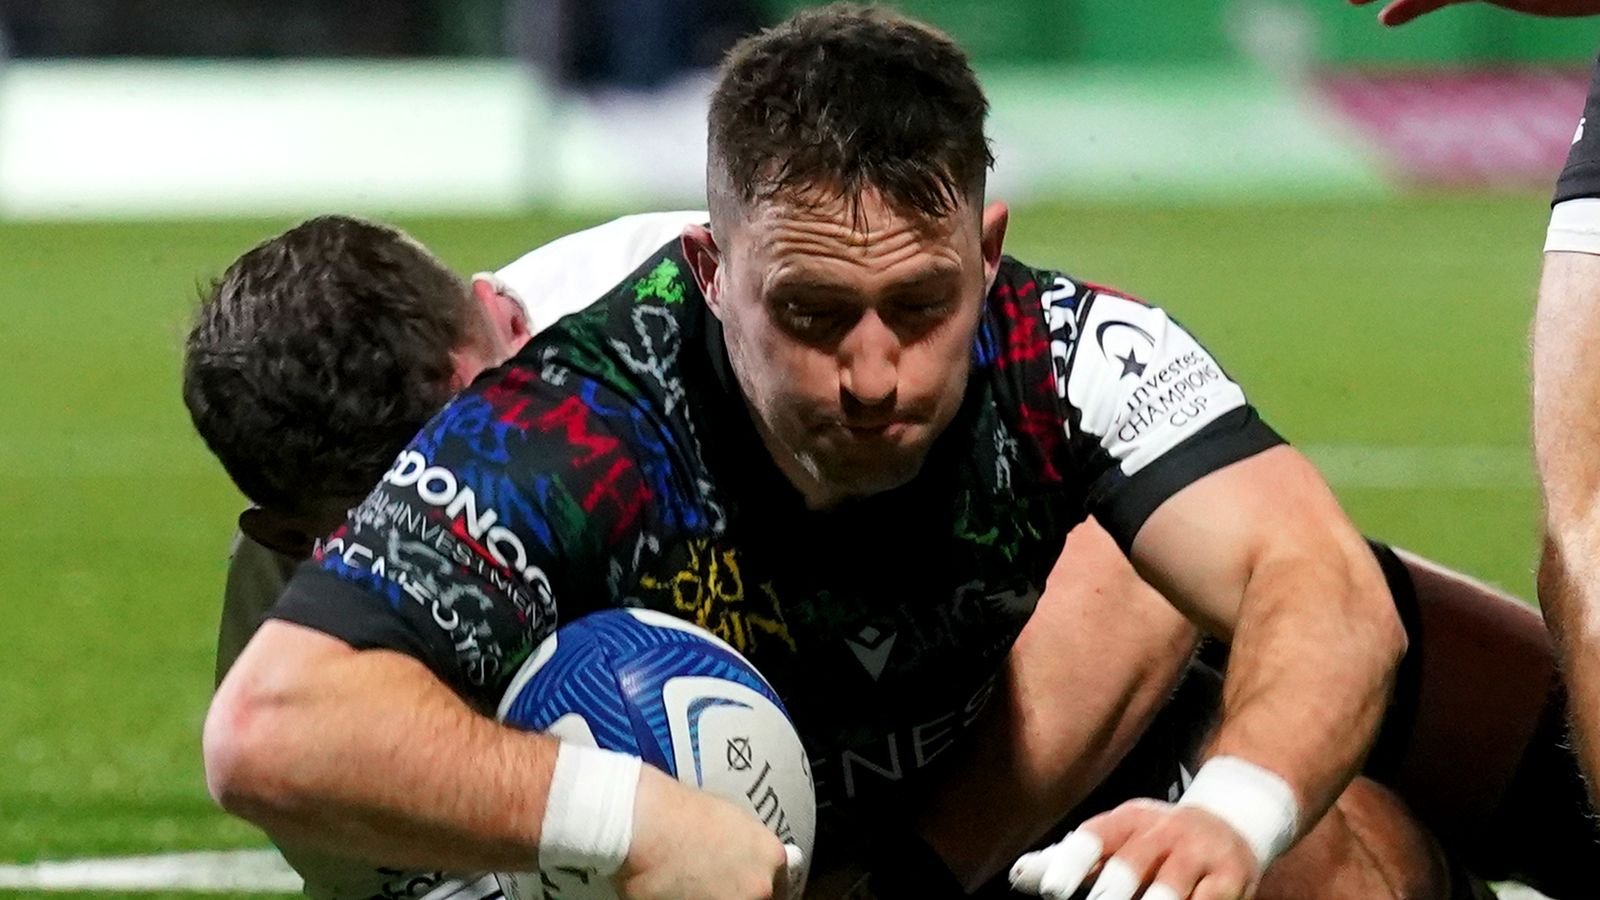 Champions Cup: Connacht finally get win over Bristol as Glasgow beat Toulon to make last 16 | Rugby Union News